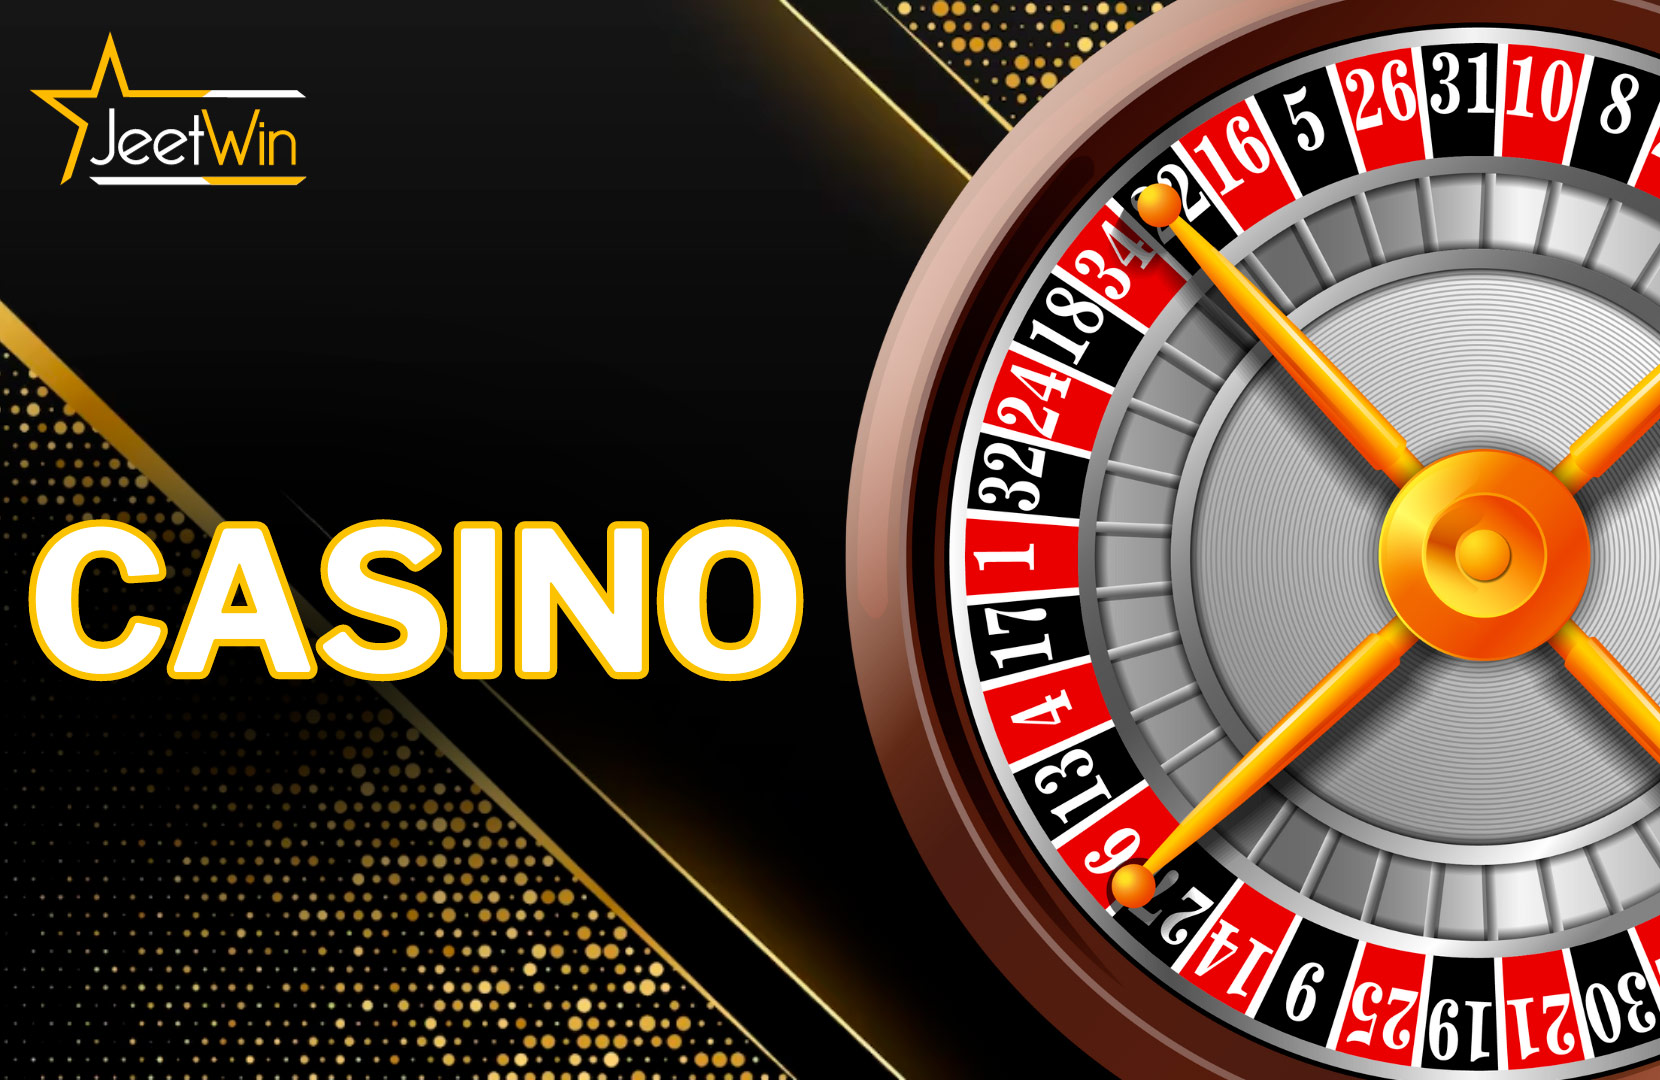 Discover Top-Rated Casino Games at Jeetwin